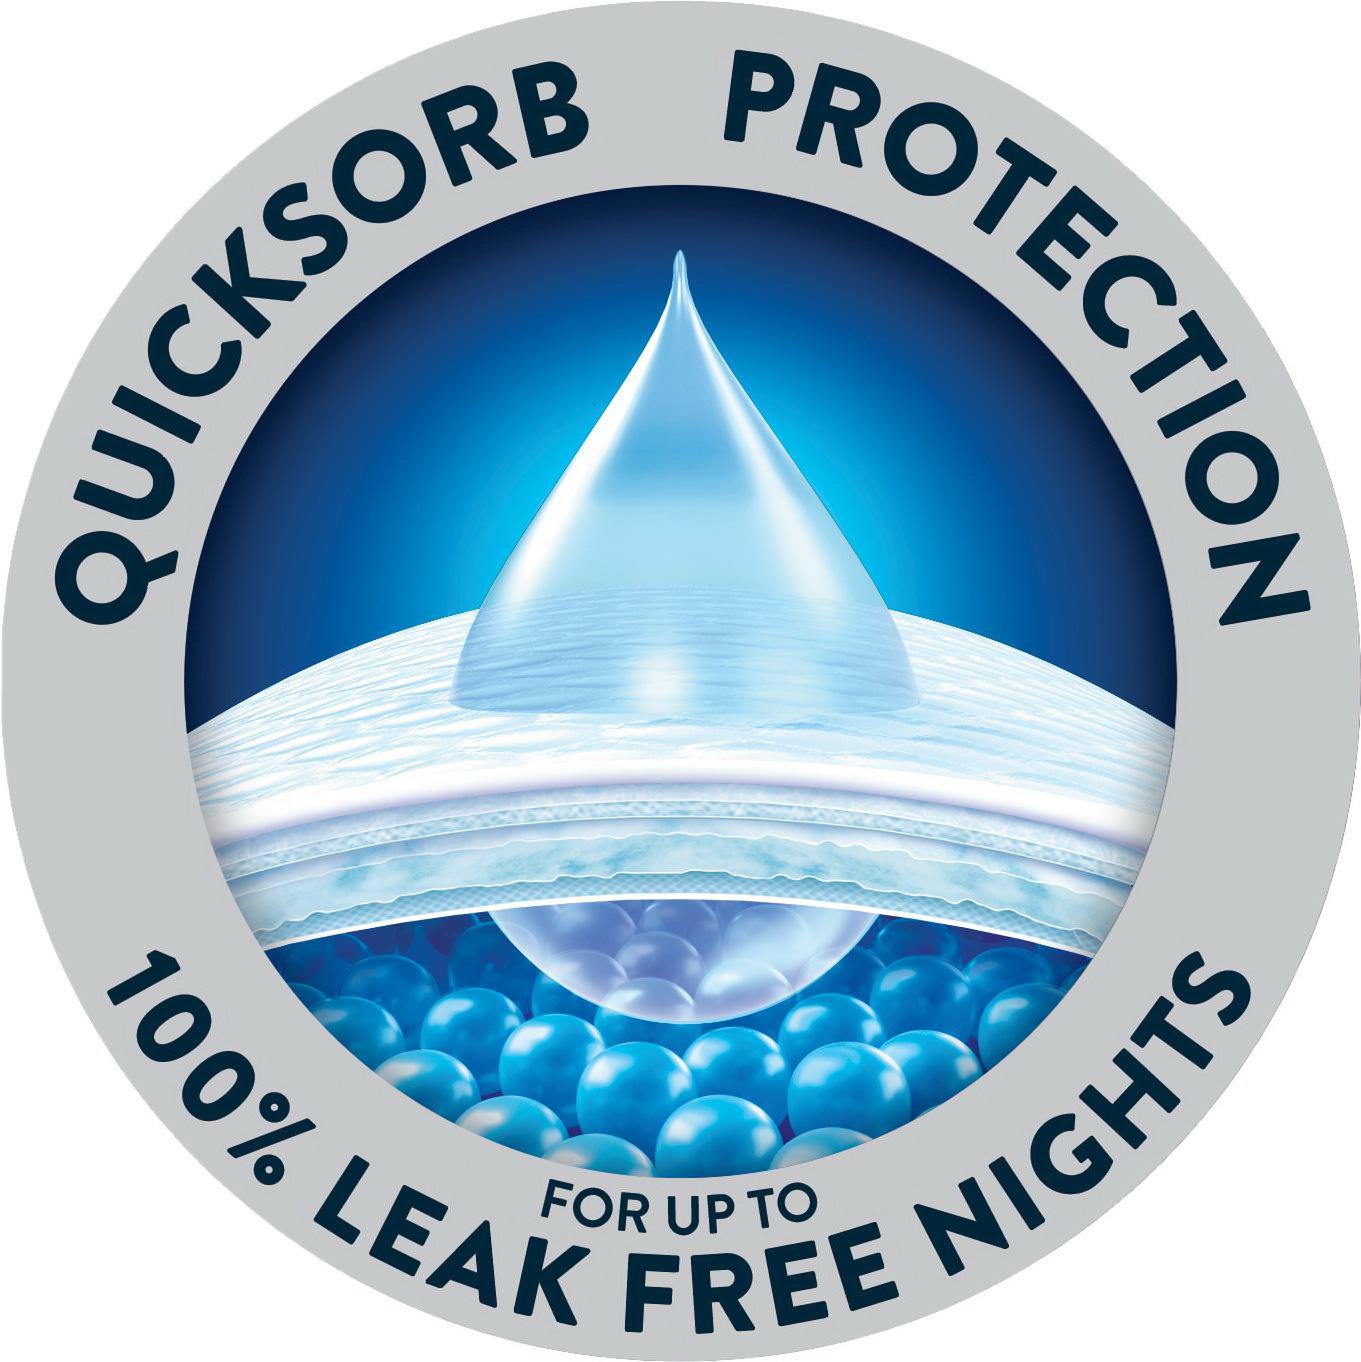  QUICKSORB PROTECTION FOR UP TO 100% LEAK FREE NIGHTS